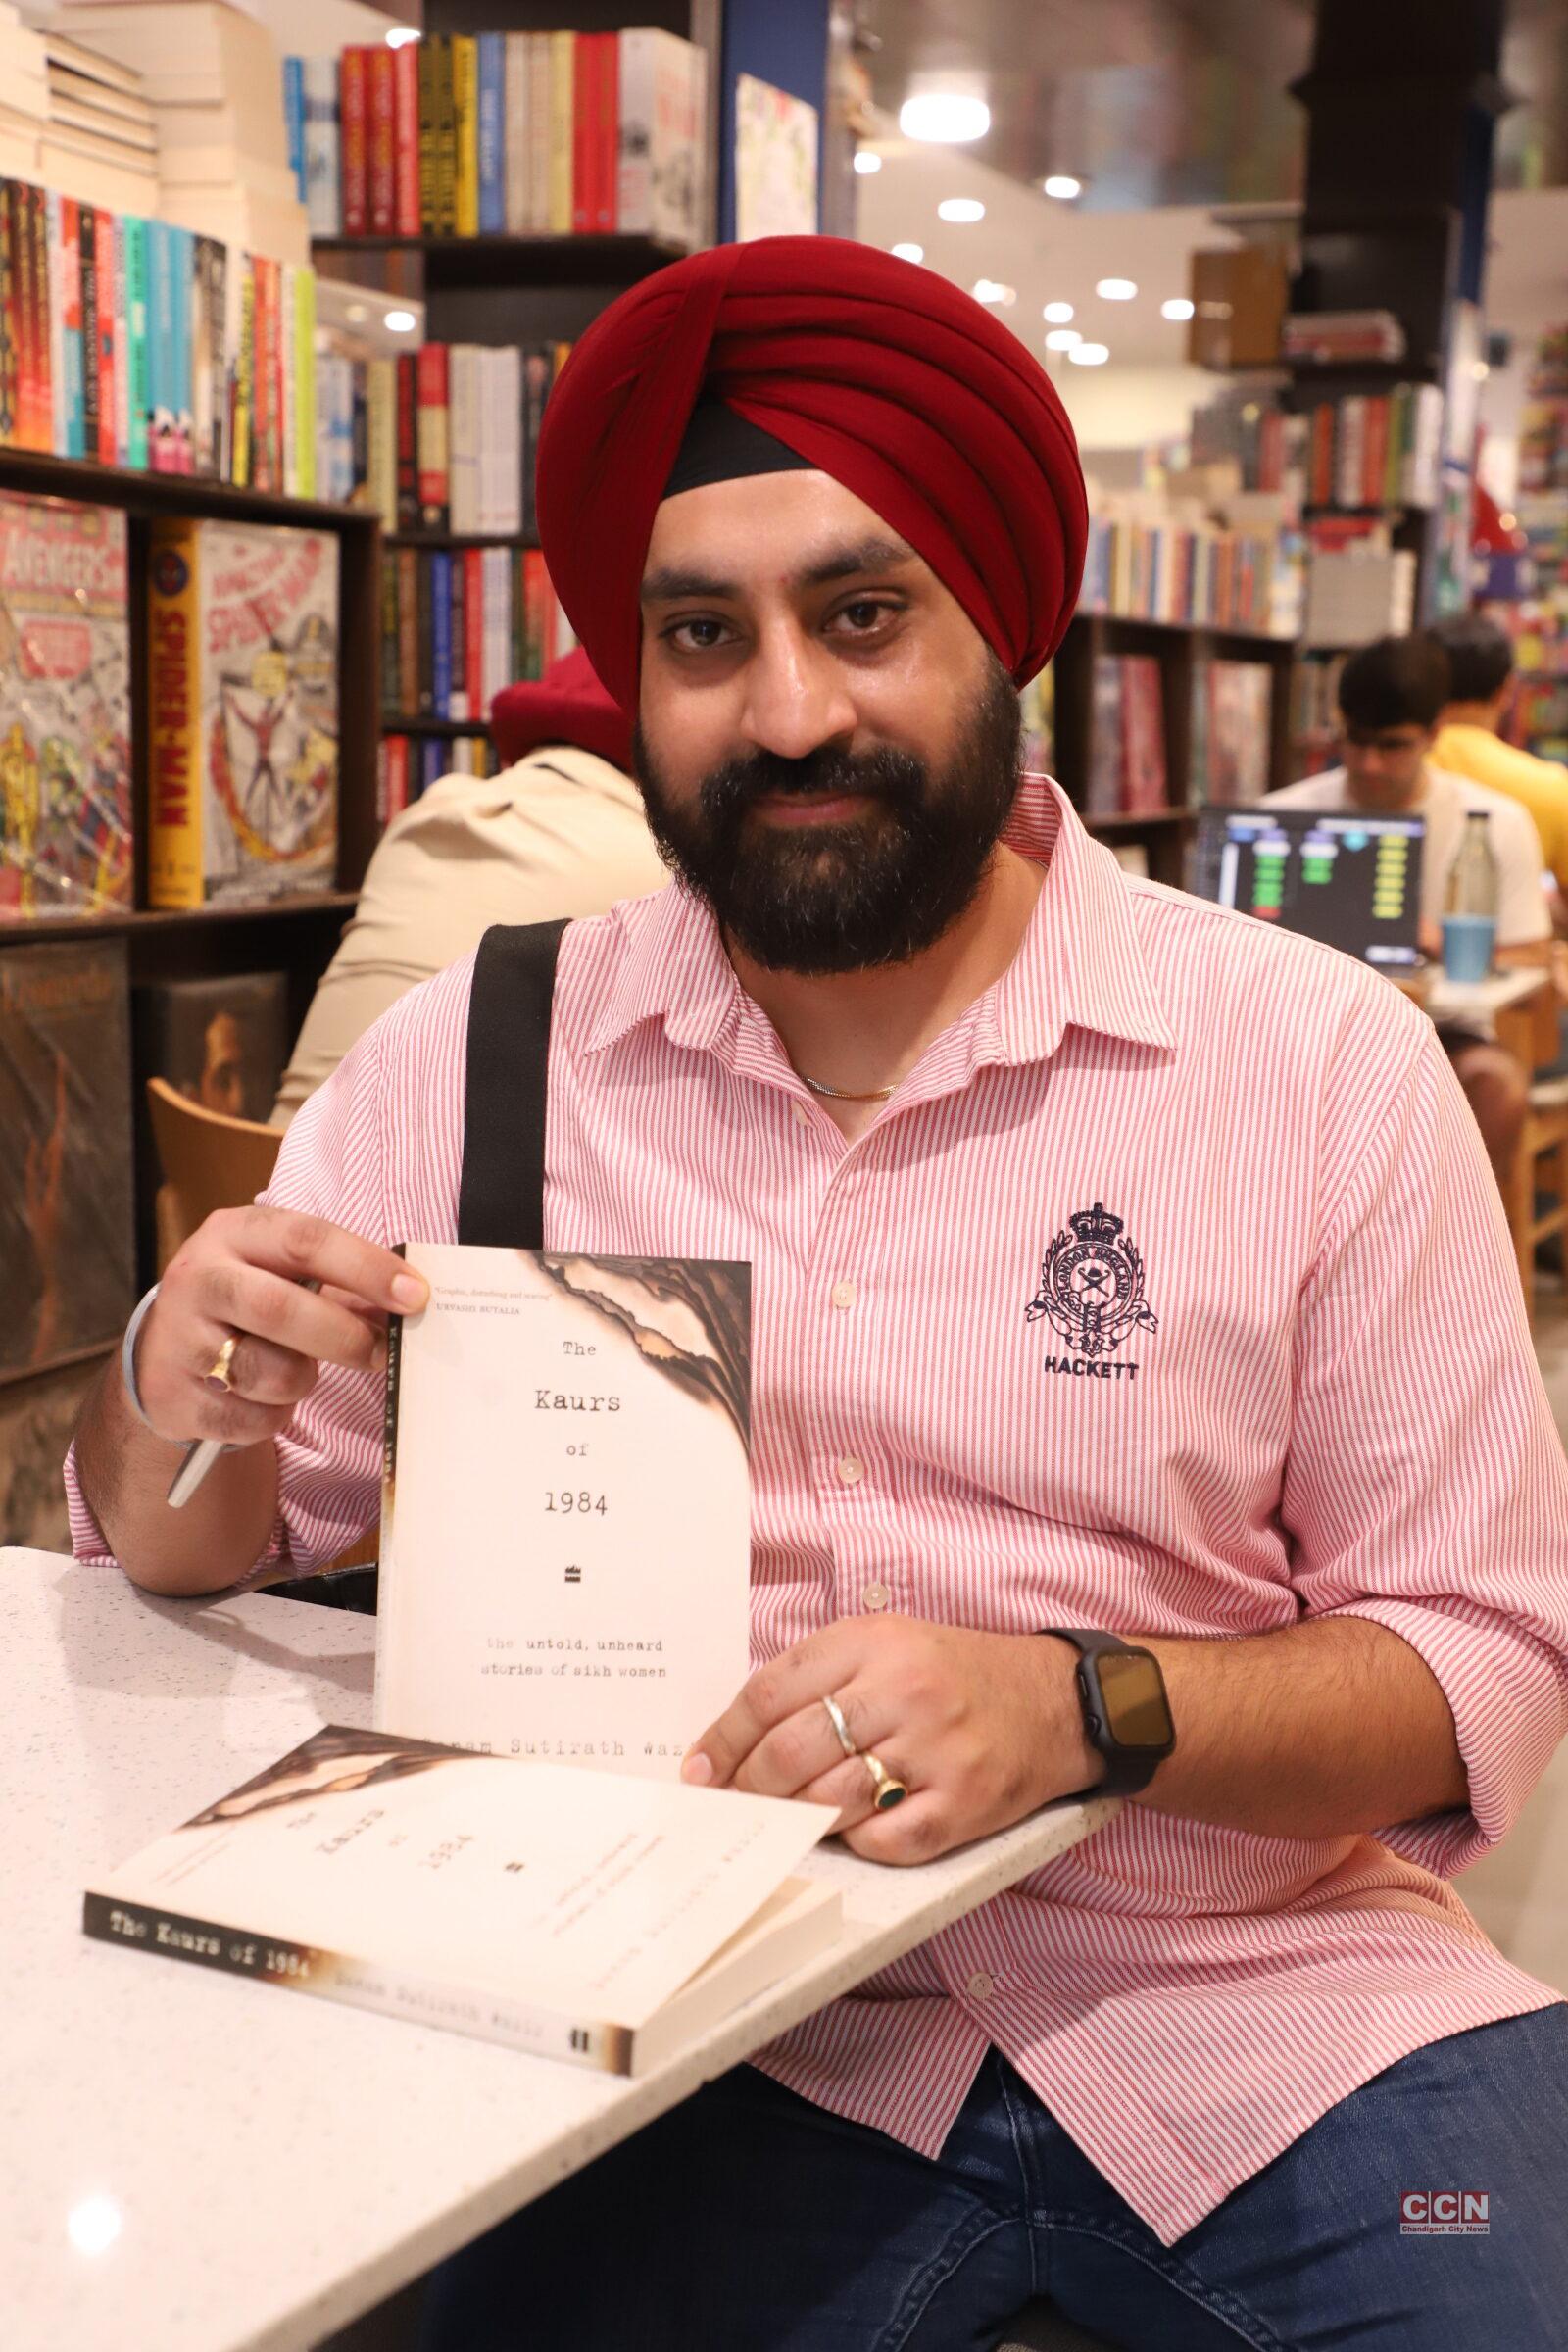 New Book Shines Light on Untold Stories of Sikh Women Affected by 1984 Violence